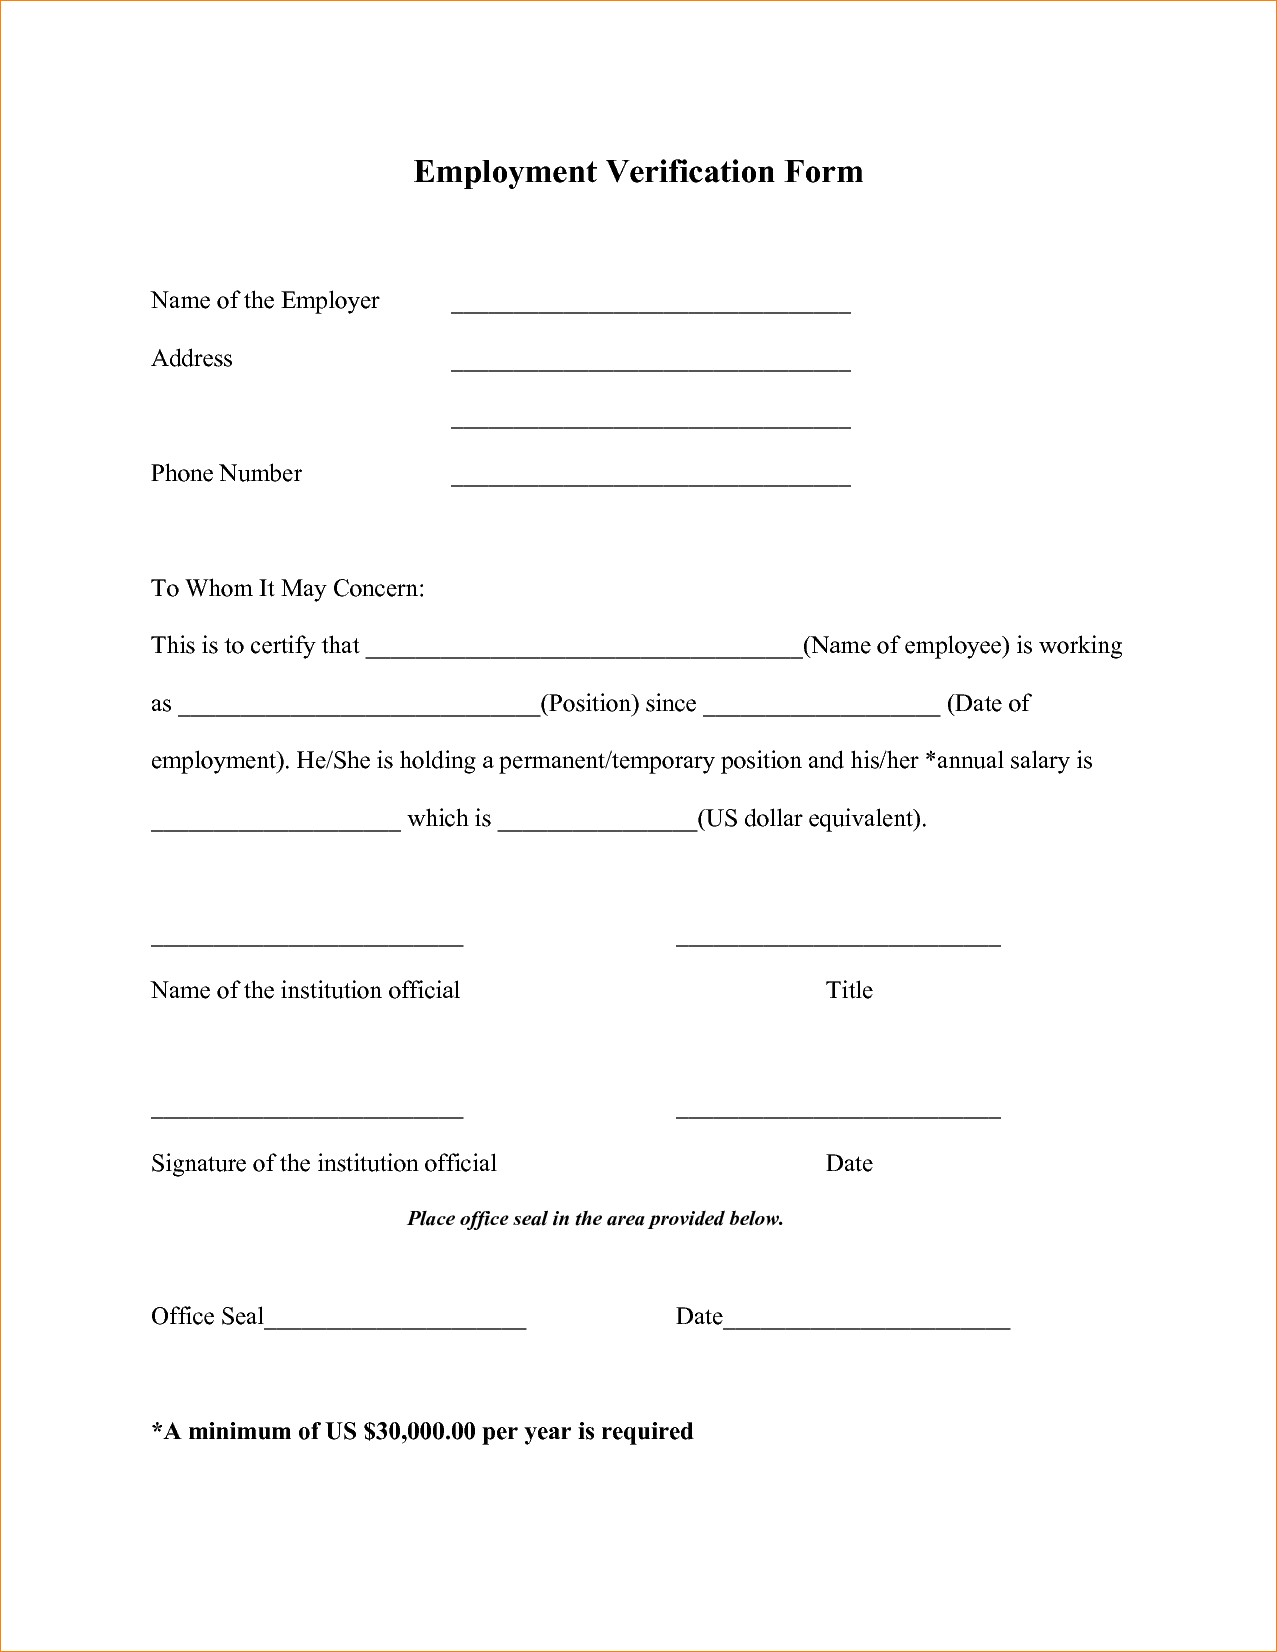 017 Letter Of Employment Offer Verification Form Templates